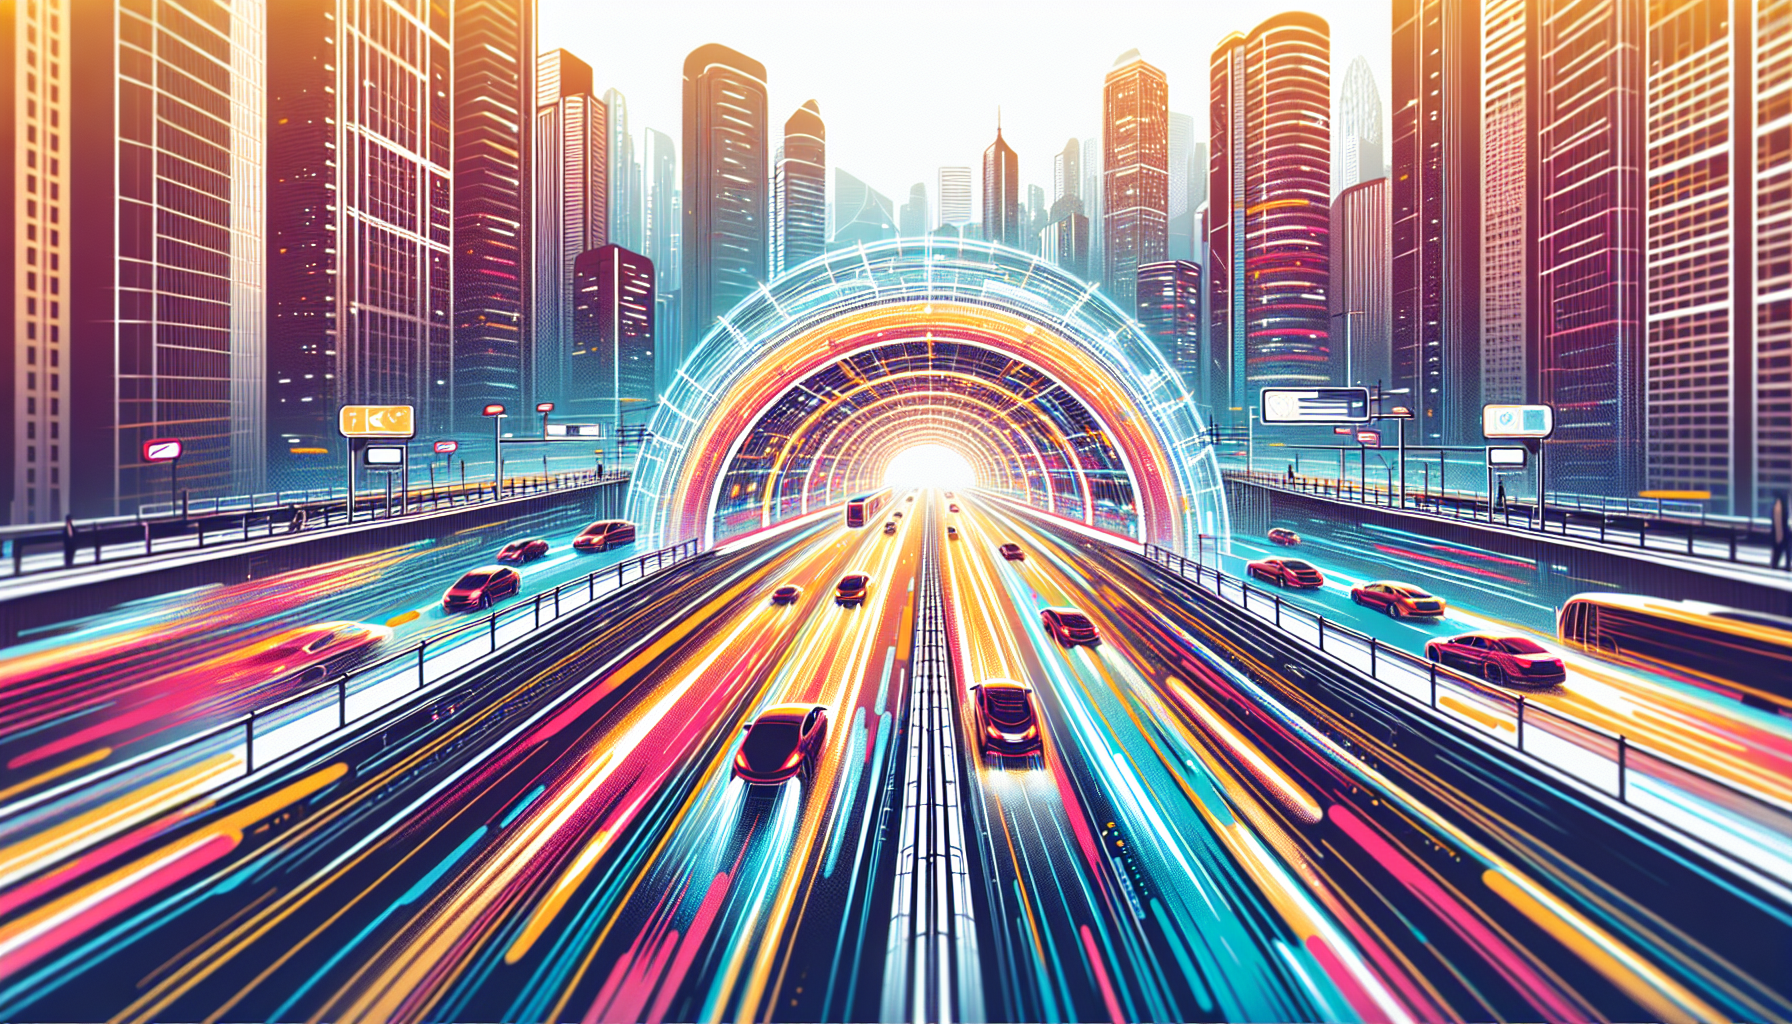 Show a network of tunnels underneath a bustling city with electric cars zooming through them.